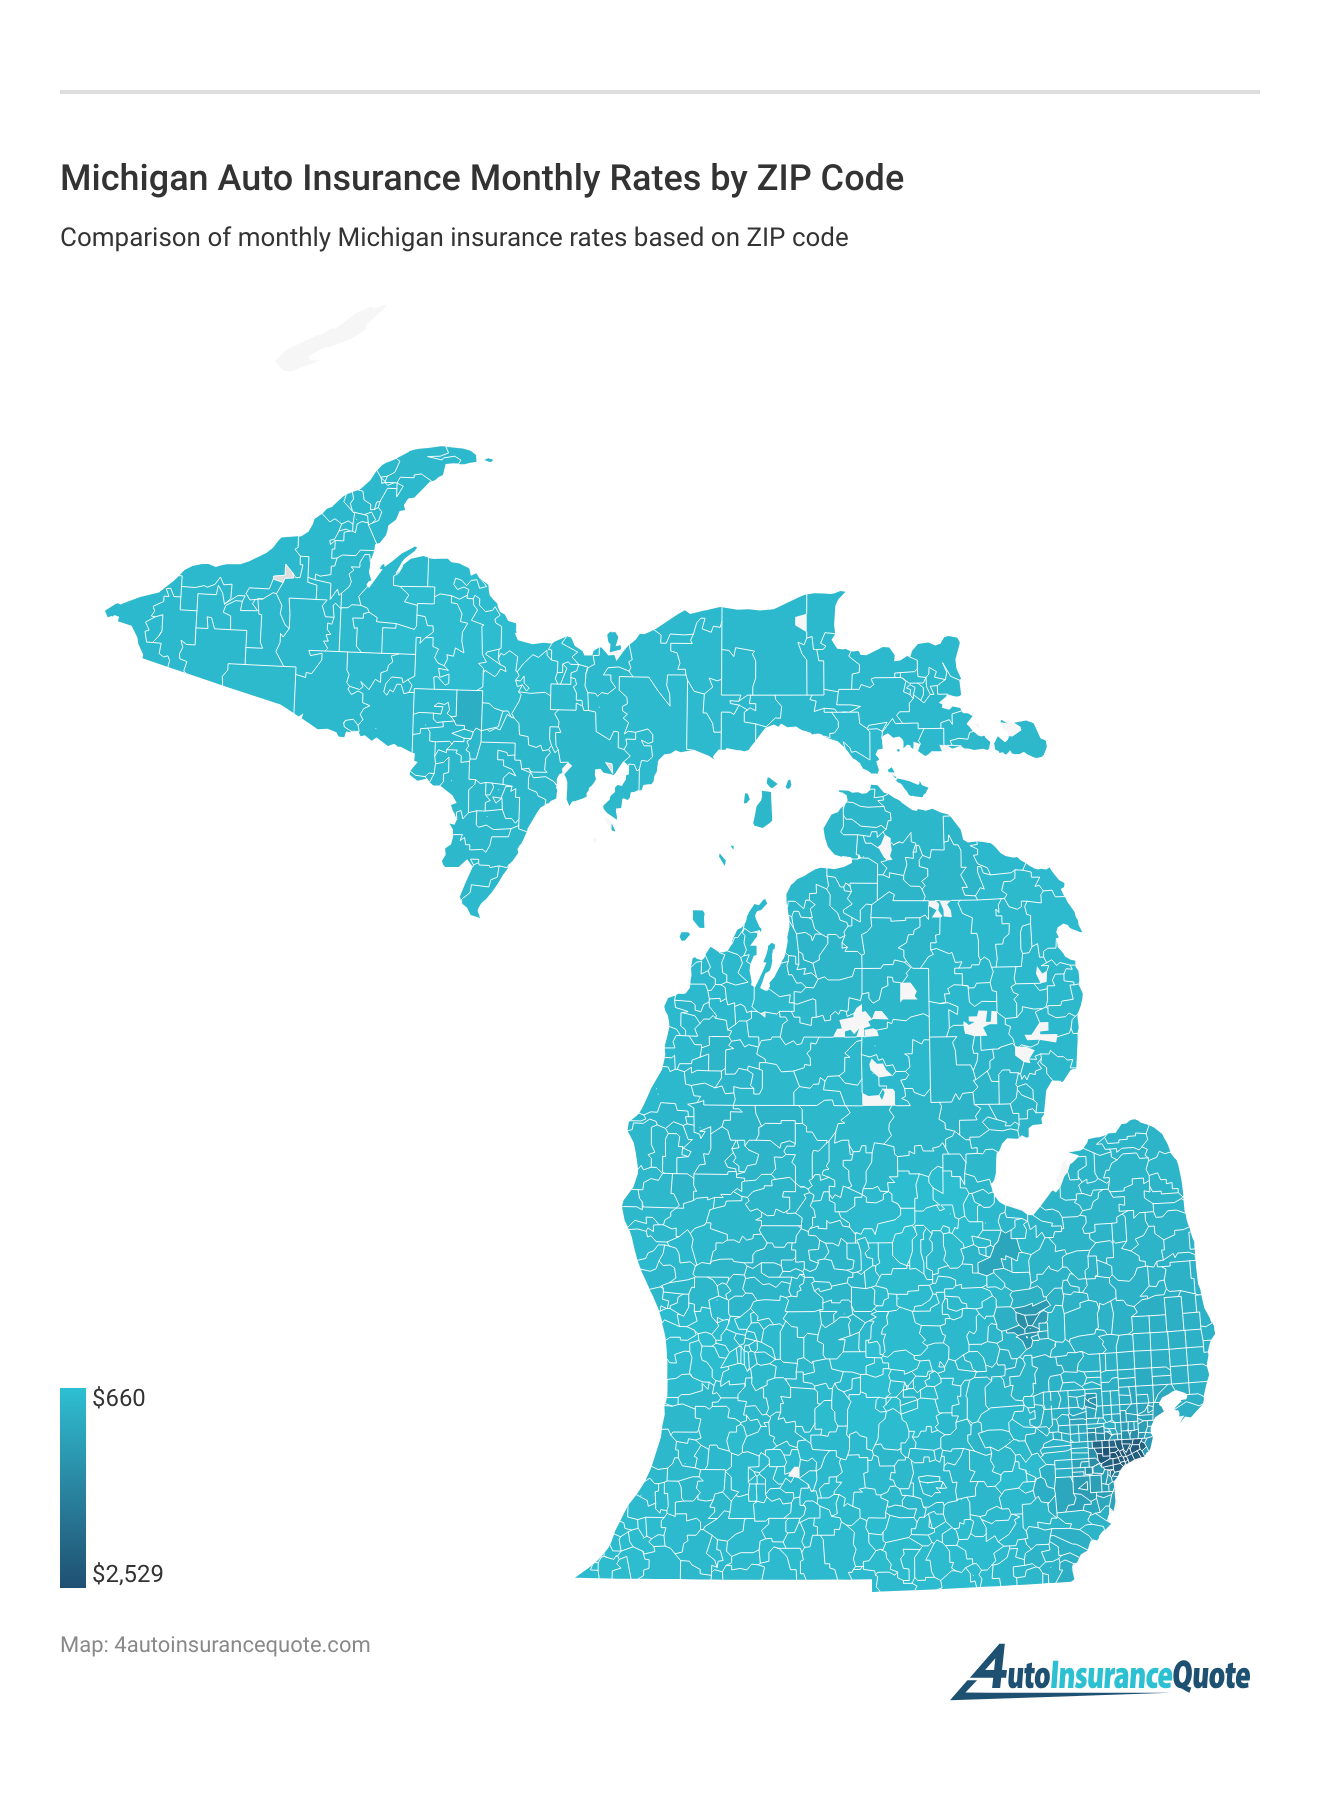 <h3>Michigan Auto Insurance Monthly Rates by ZIP Code</h3>